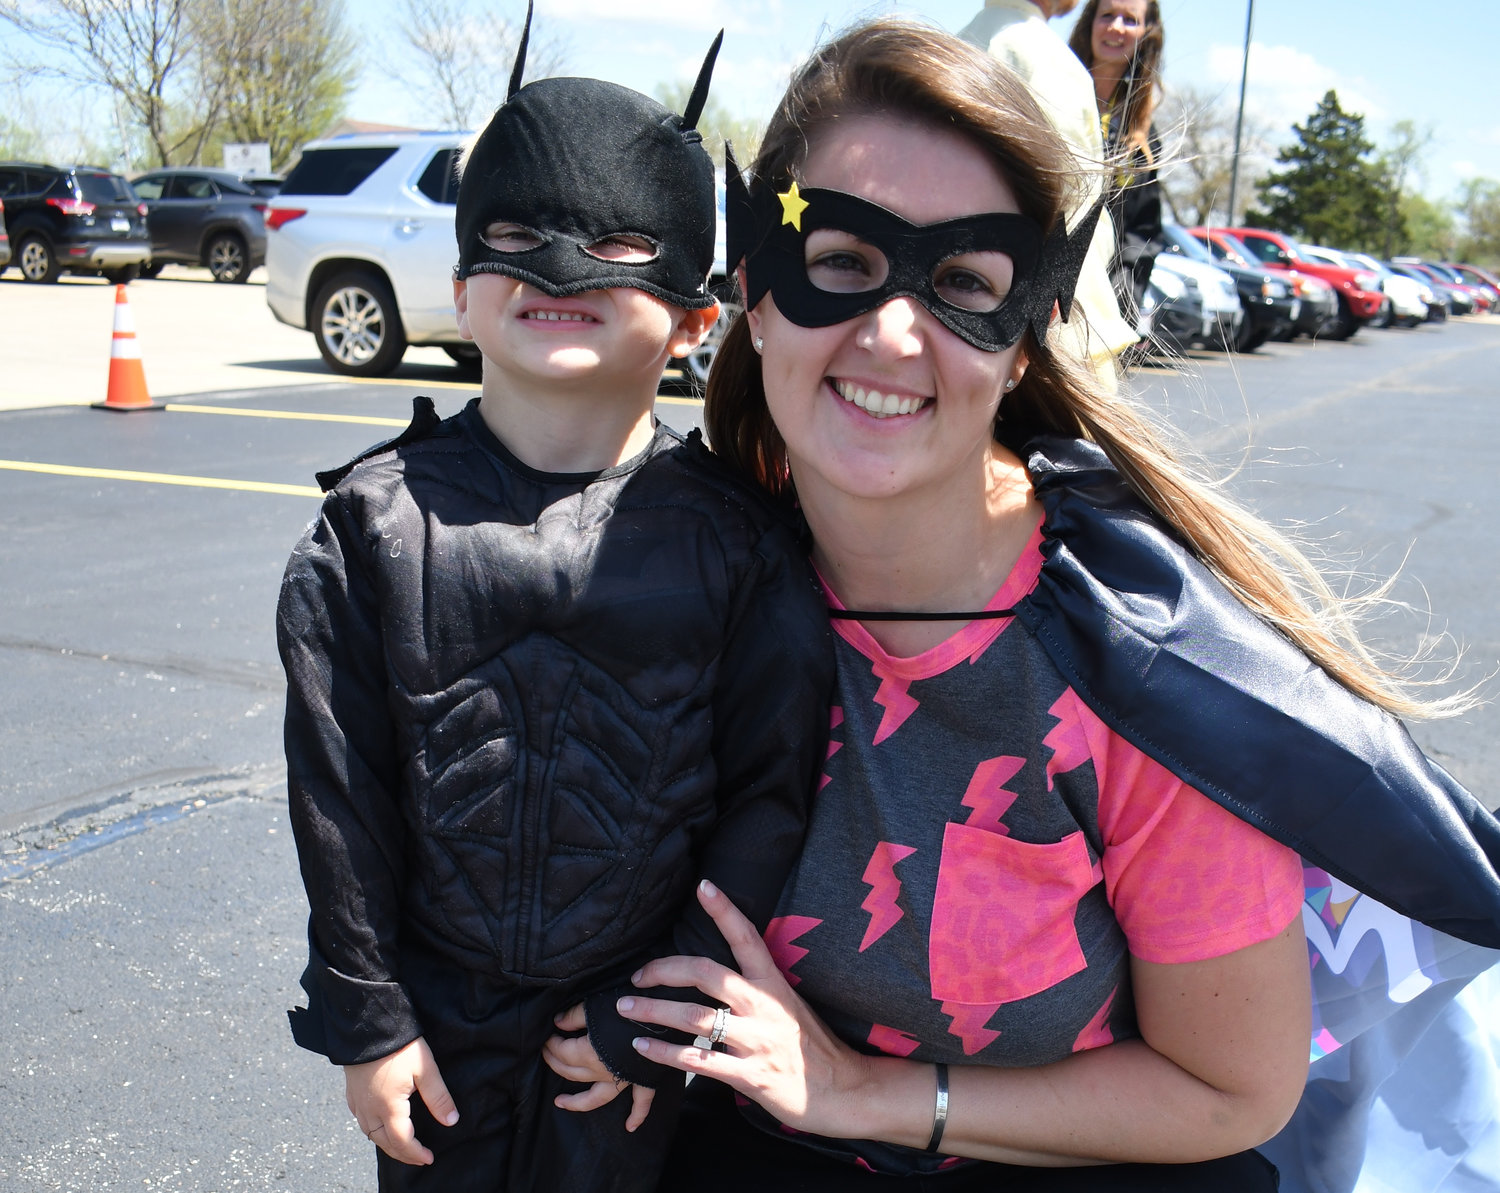 Batman Ares DuBose and his Super Mom, Claudette DuBose, show off their inner superheroes at the event.